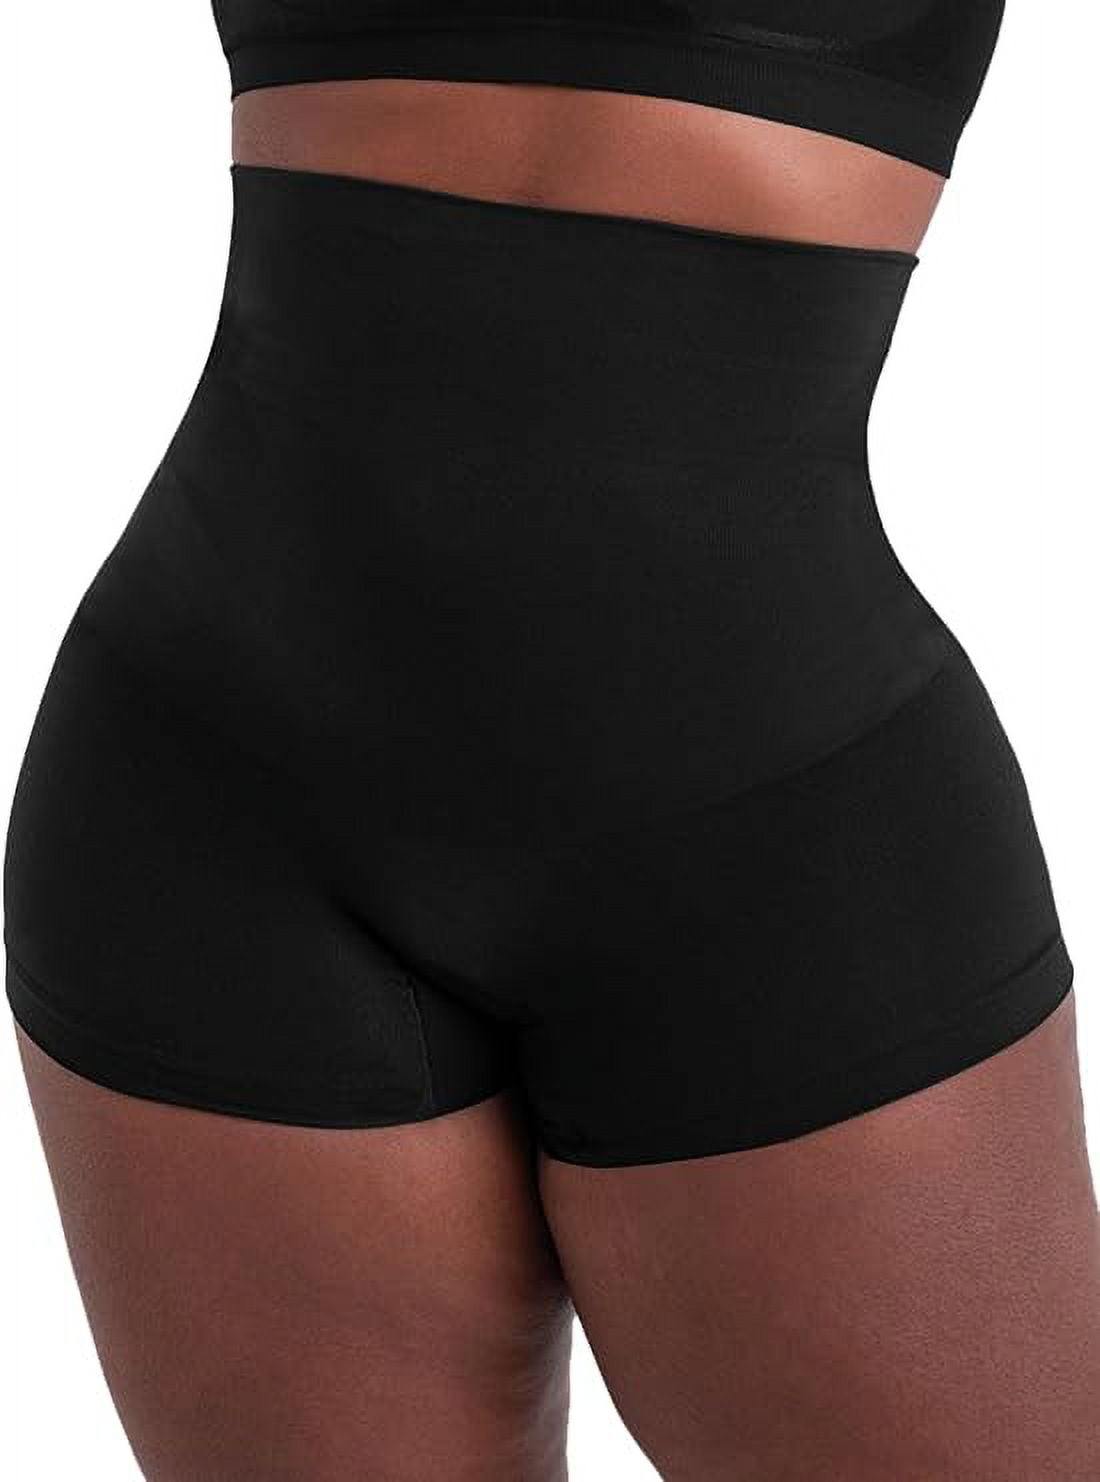 Shapermint Empetua Women's All Day Every Day High Waisted Shaper